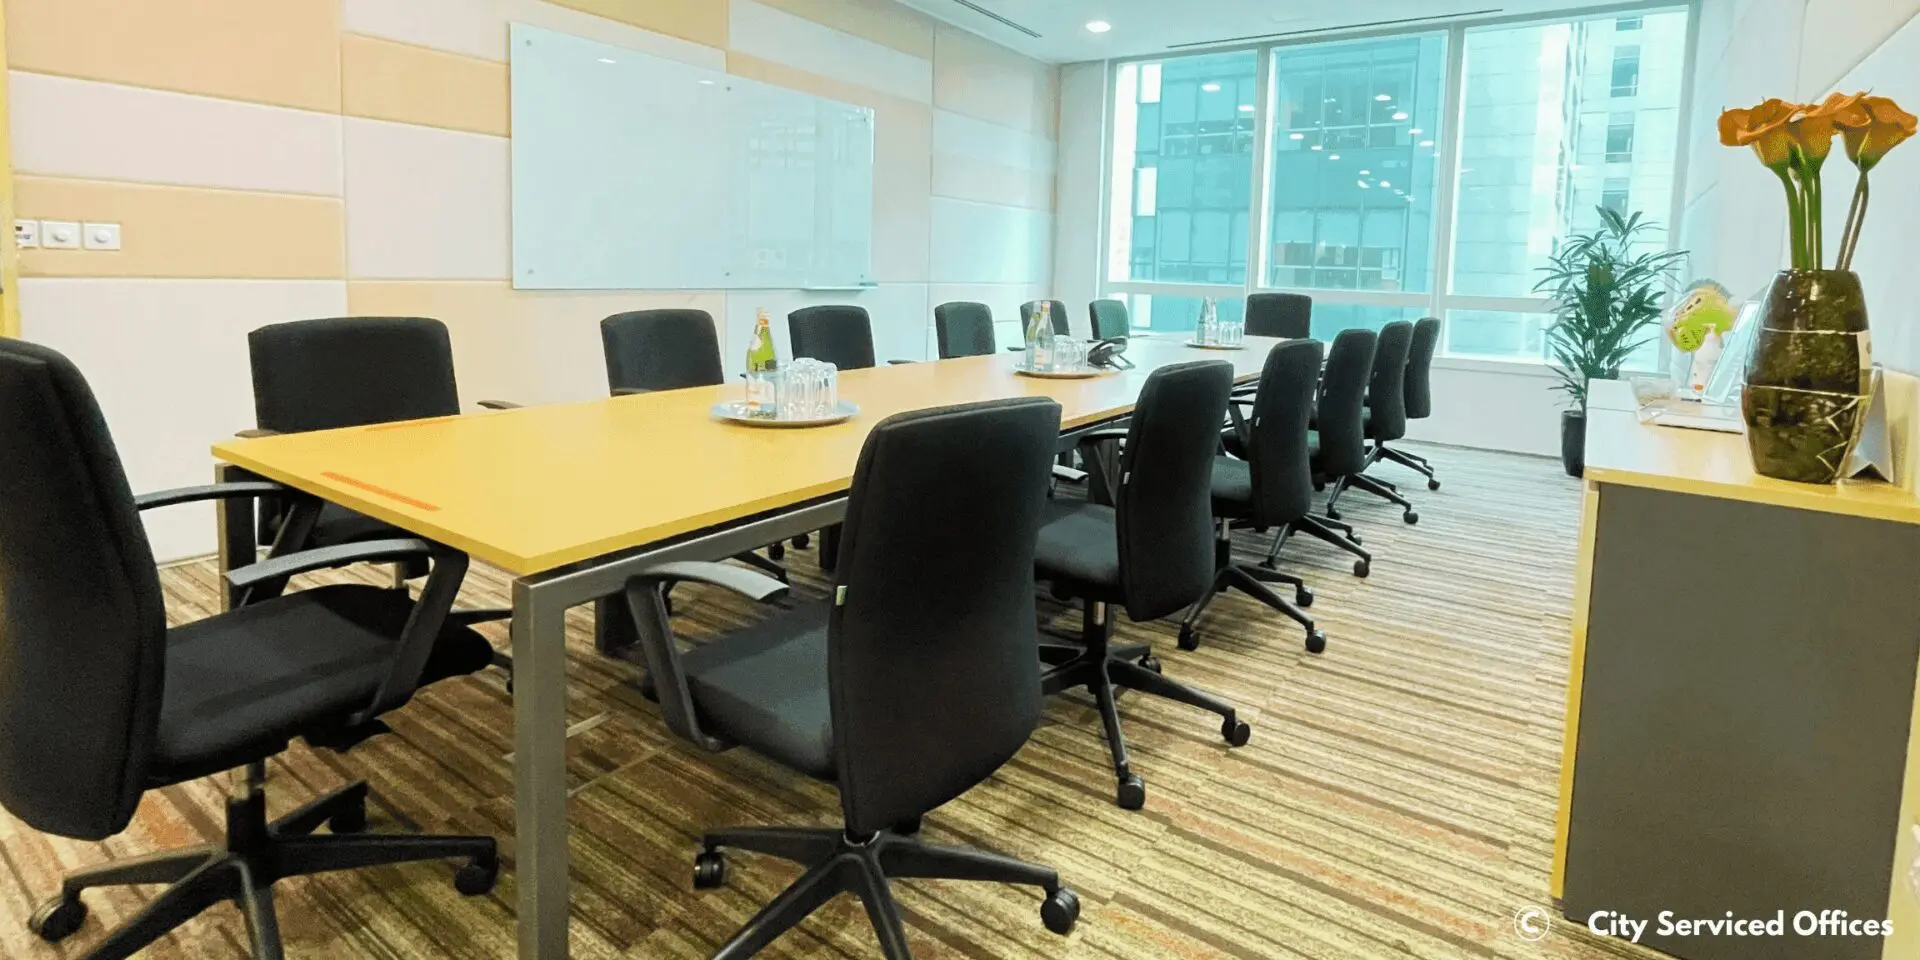 CITY SERVICED OFFICES – Republic Plaza Tower 2 Level 17